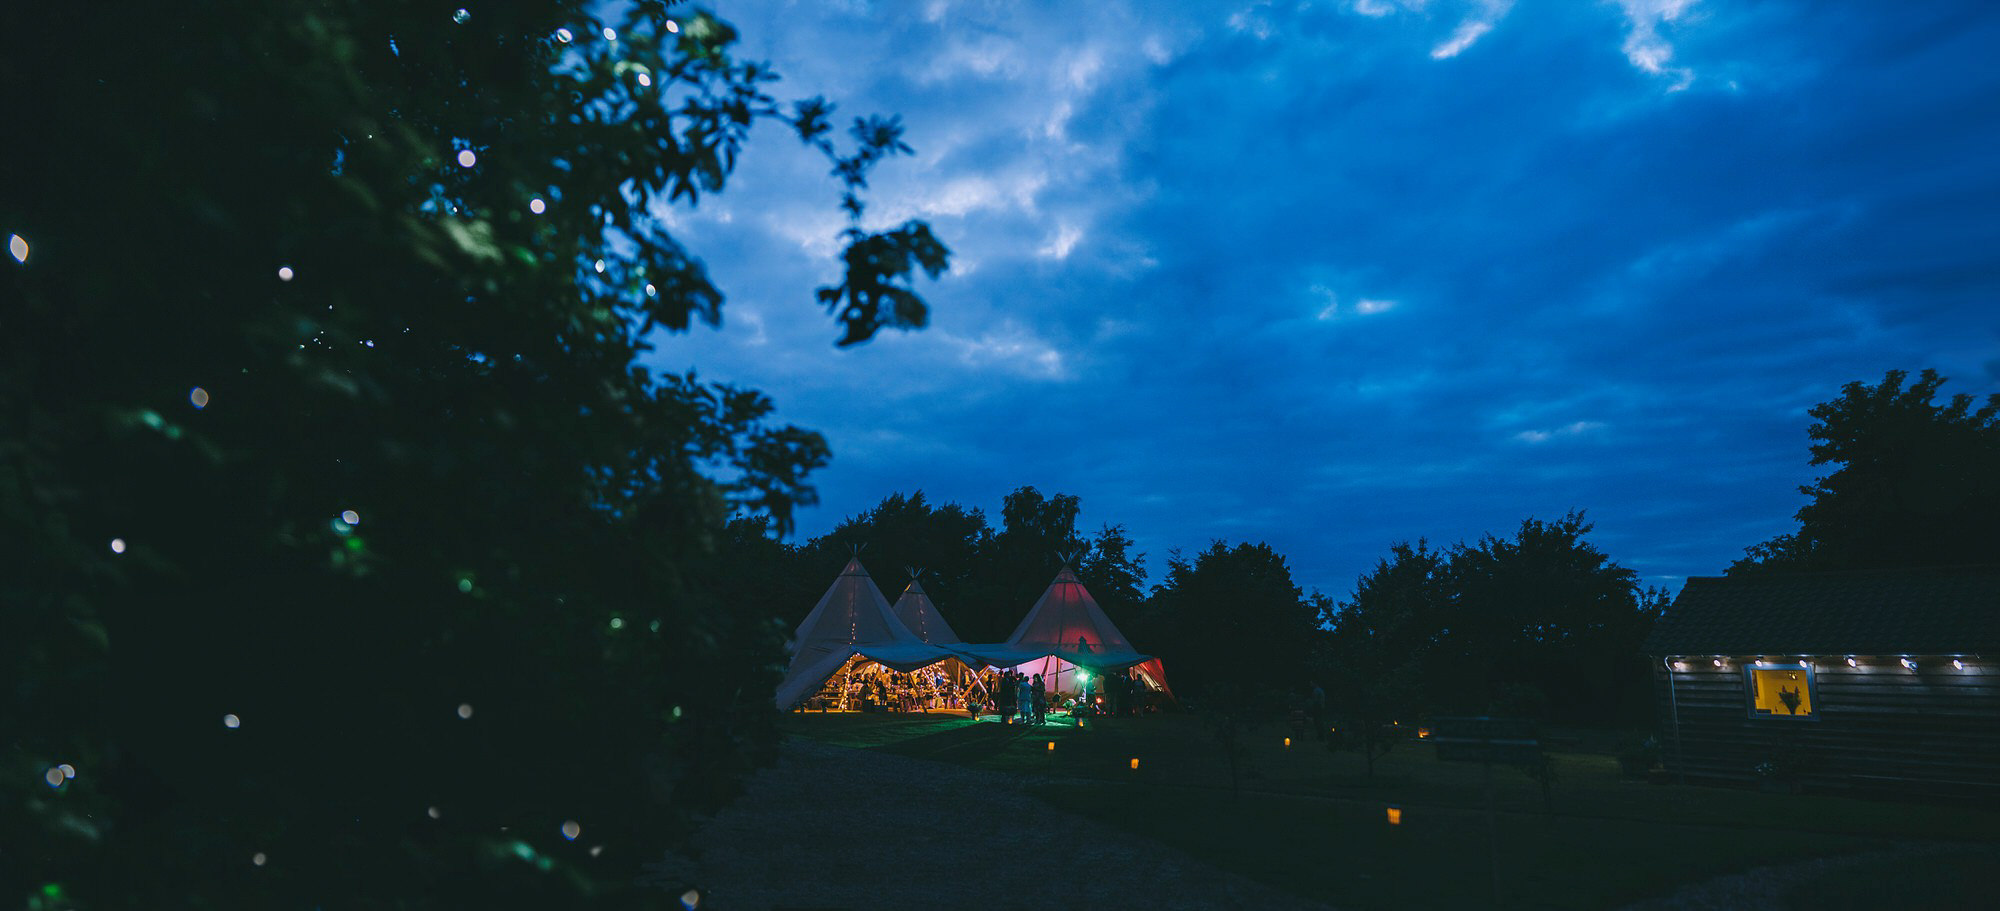 tipi-wedding-in-diss-norfolk-by-james-powell-photography-034